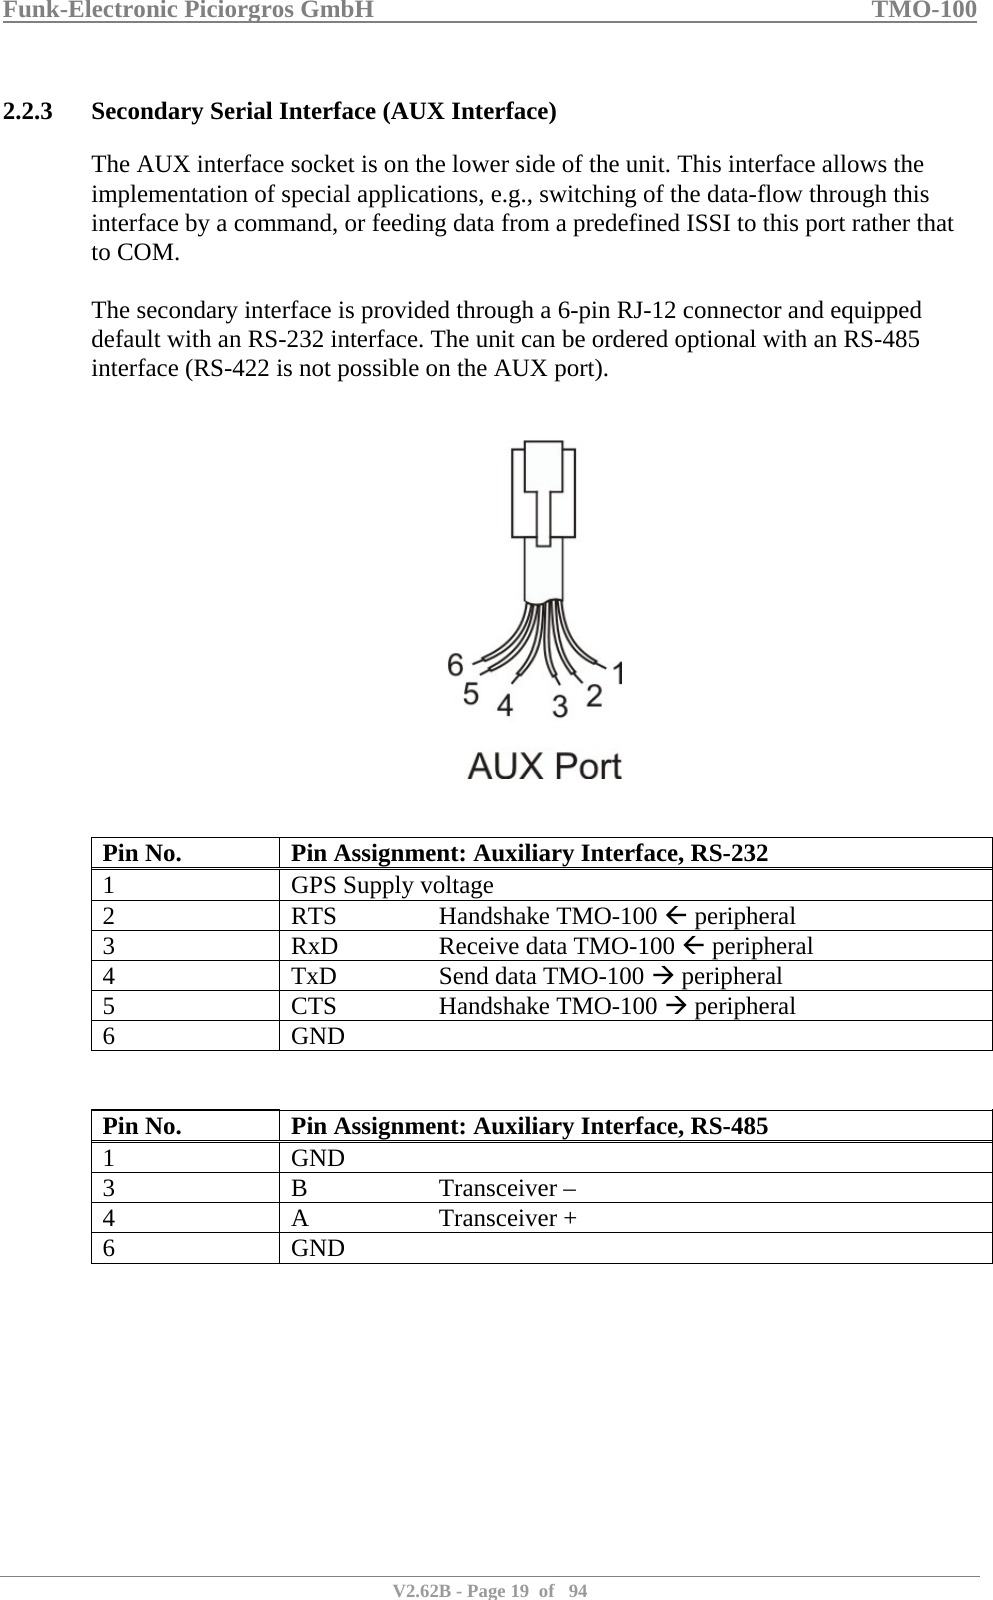 Funk-Electronic Piciorgros GmbH   TMO-100   V2.62B - Page 19  of   94   2.2.3 Secondary Serial Interface (AUX Interface) The AUX interface socket is on the lower side of the unit. This interface allows the implementation of special applications, e.g., switching of the data-flow through this interface by a command, or feeding data from a predefined ISSI to this port rather that to COM.  The secondary interface is provided through a 6-pin RJ-12 connector and equipped default with an RS-232 interface. The unit can be ordered optional with an RS-485 interface (RS-422 is not possible on the AUX port).      Pin No.  Pin Assignment: Auxiliary Interface, RS-232 1  GPS Supply voltage 2 RTS  Handshake TMO-100 Å peripheral 3  RxD    Receive data TMO-100 Å peripheral 4  TxD    Send data TMO-100 Æ peripheral 5 CTS  Handshake TMO-100 Æ peripheral 6 GND   Pin No.  Pin Assignment: Auxiliary Interface, RS-485 1 GND 3 B  Transceiver – 4 A  Transceiver + 6 GND  